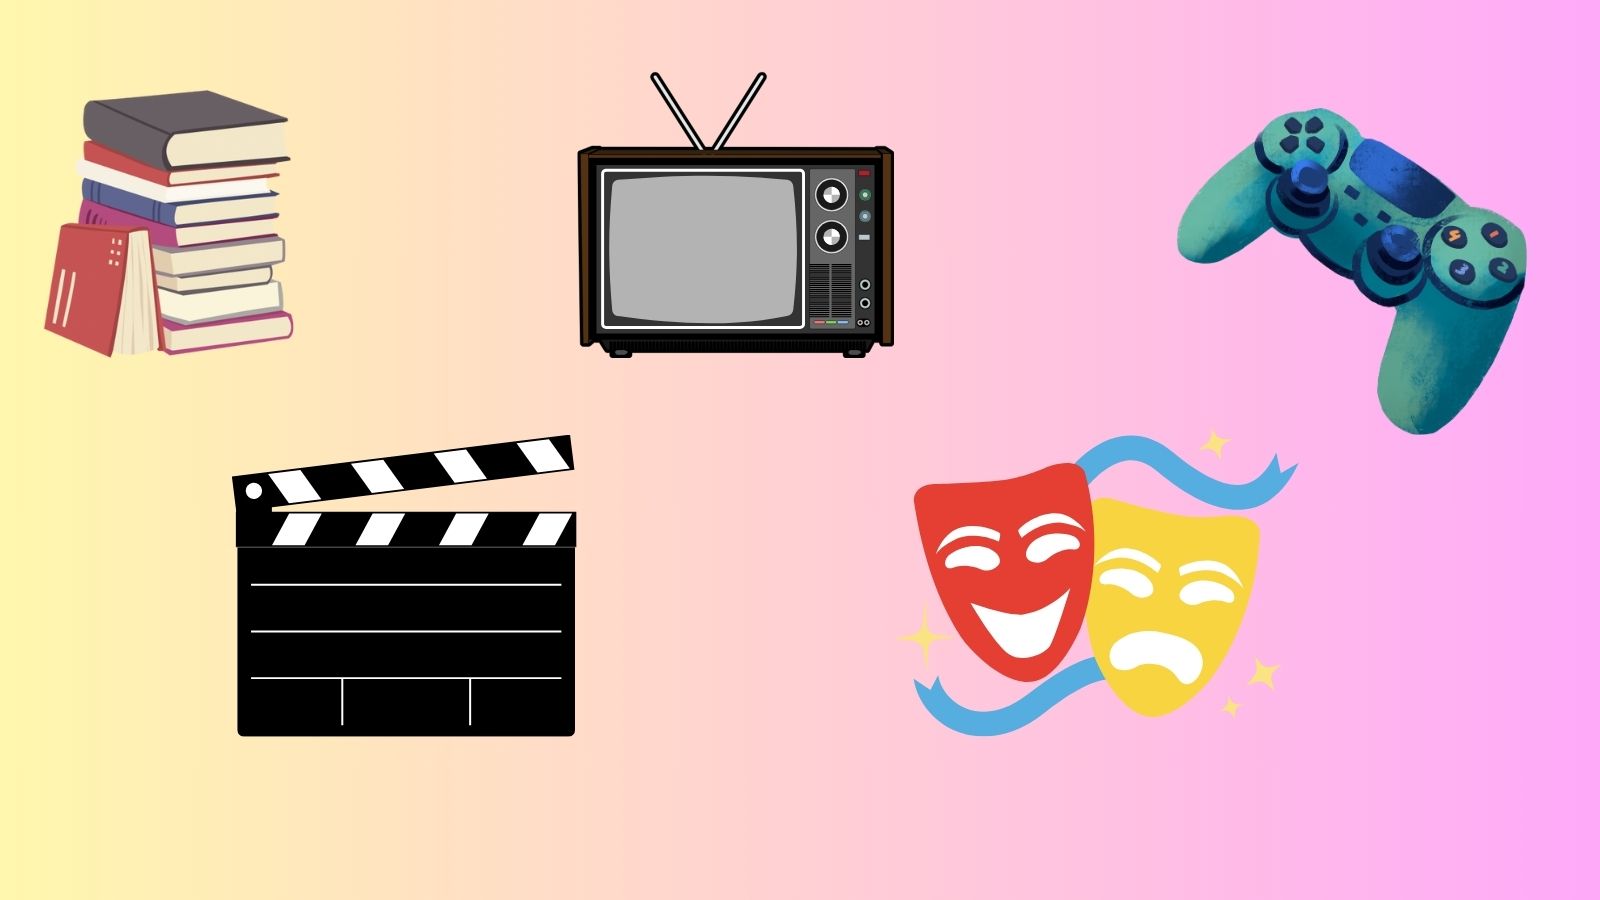 Graphics of books, movie clapperboard, television set, acting masks, and a video game controller on a yellow to pink background.